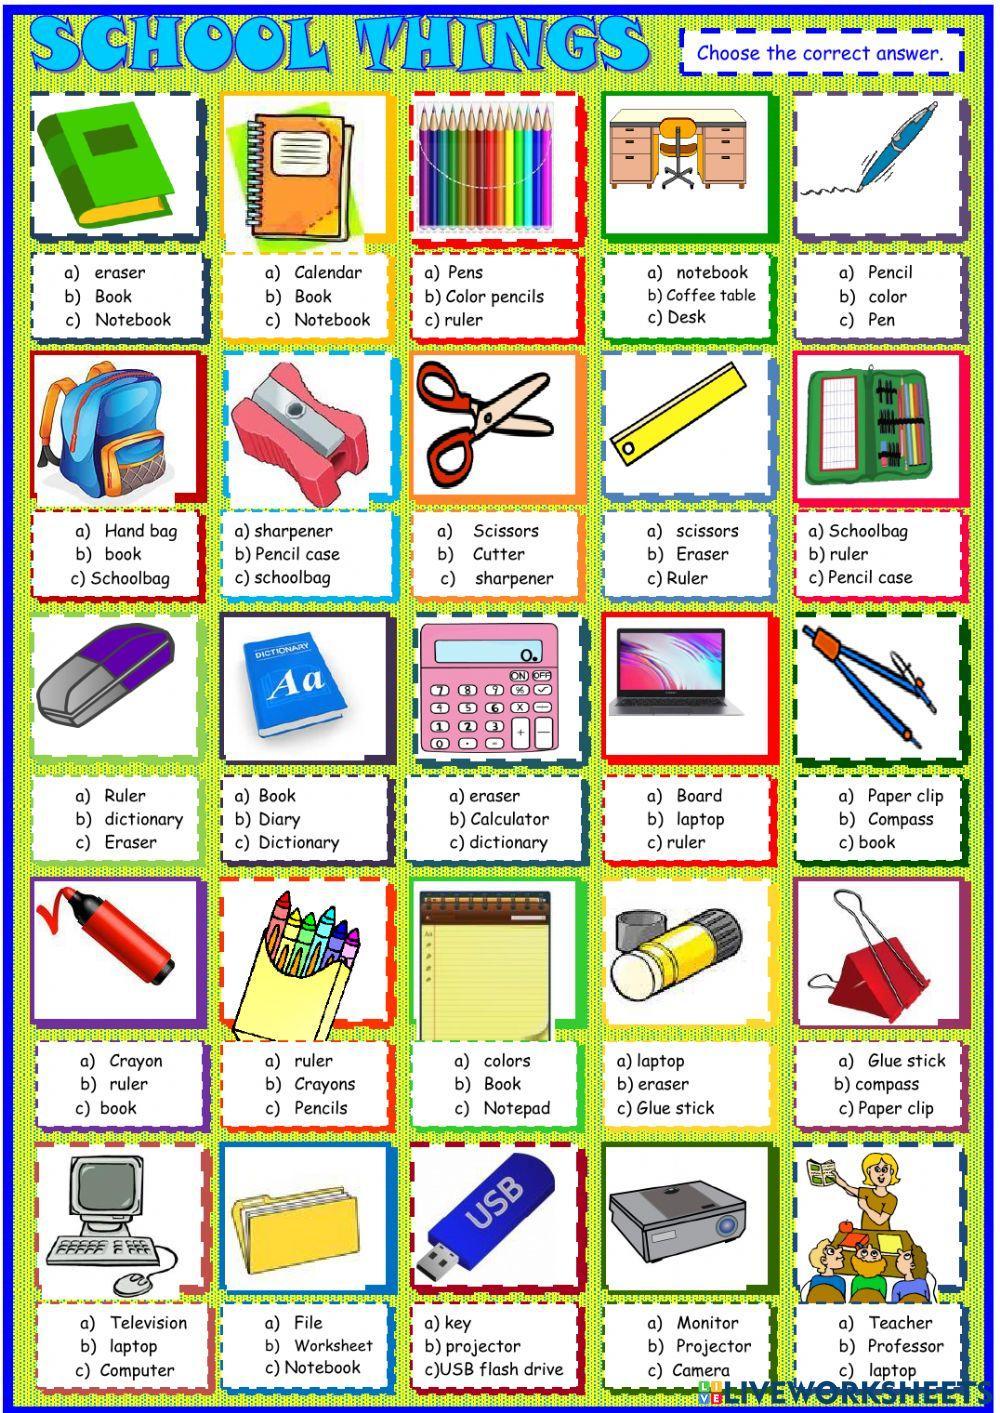 School objects online exercise for beginners